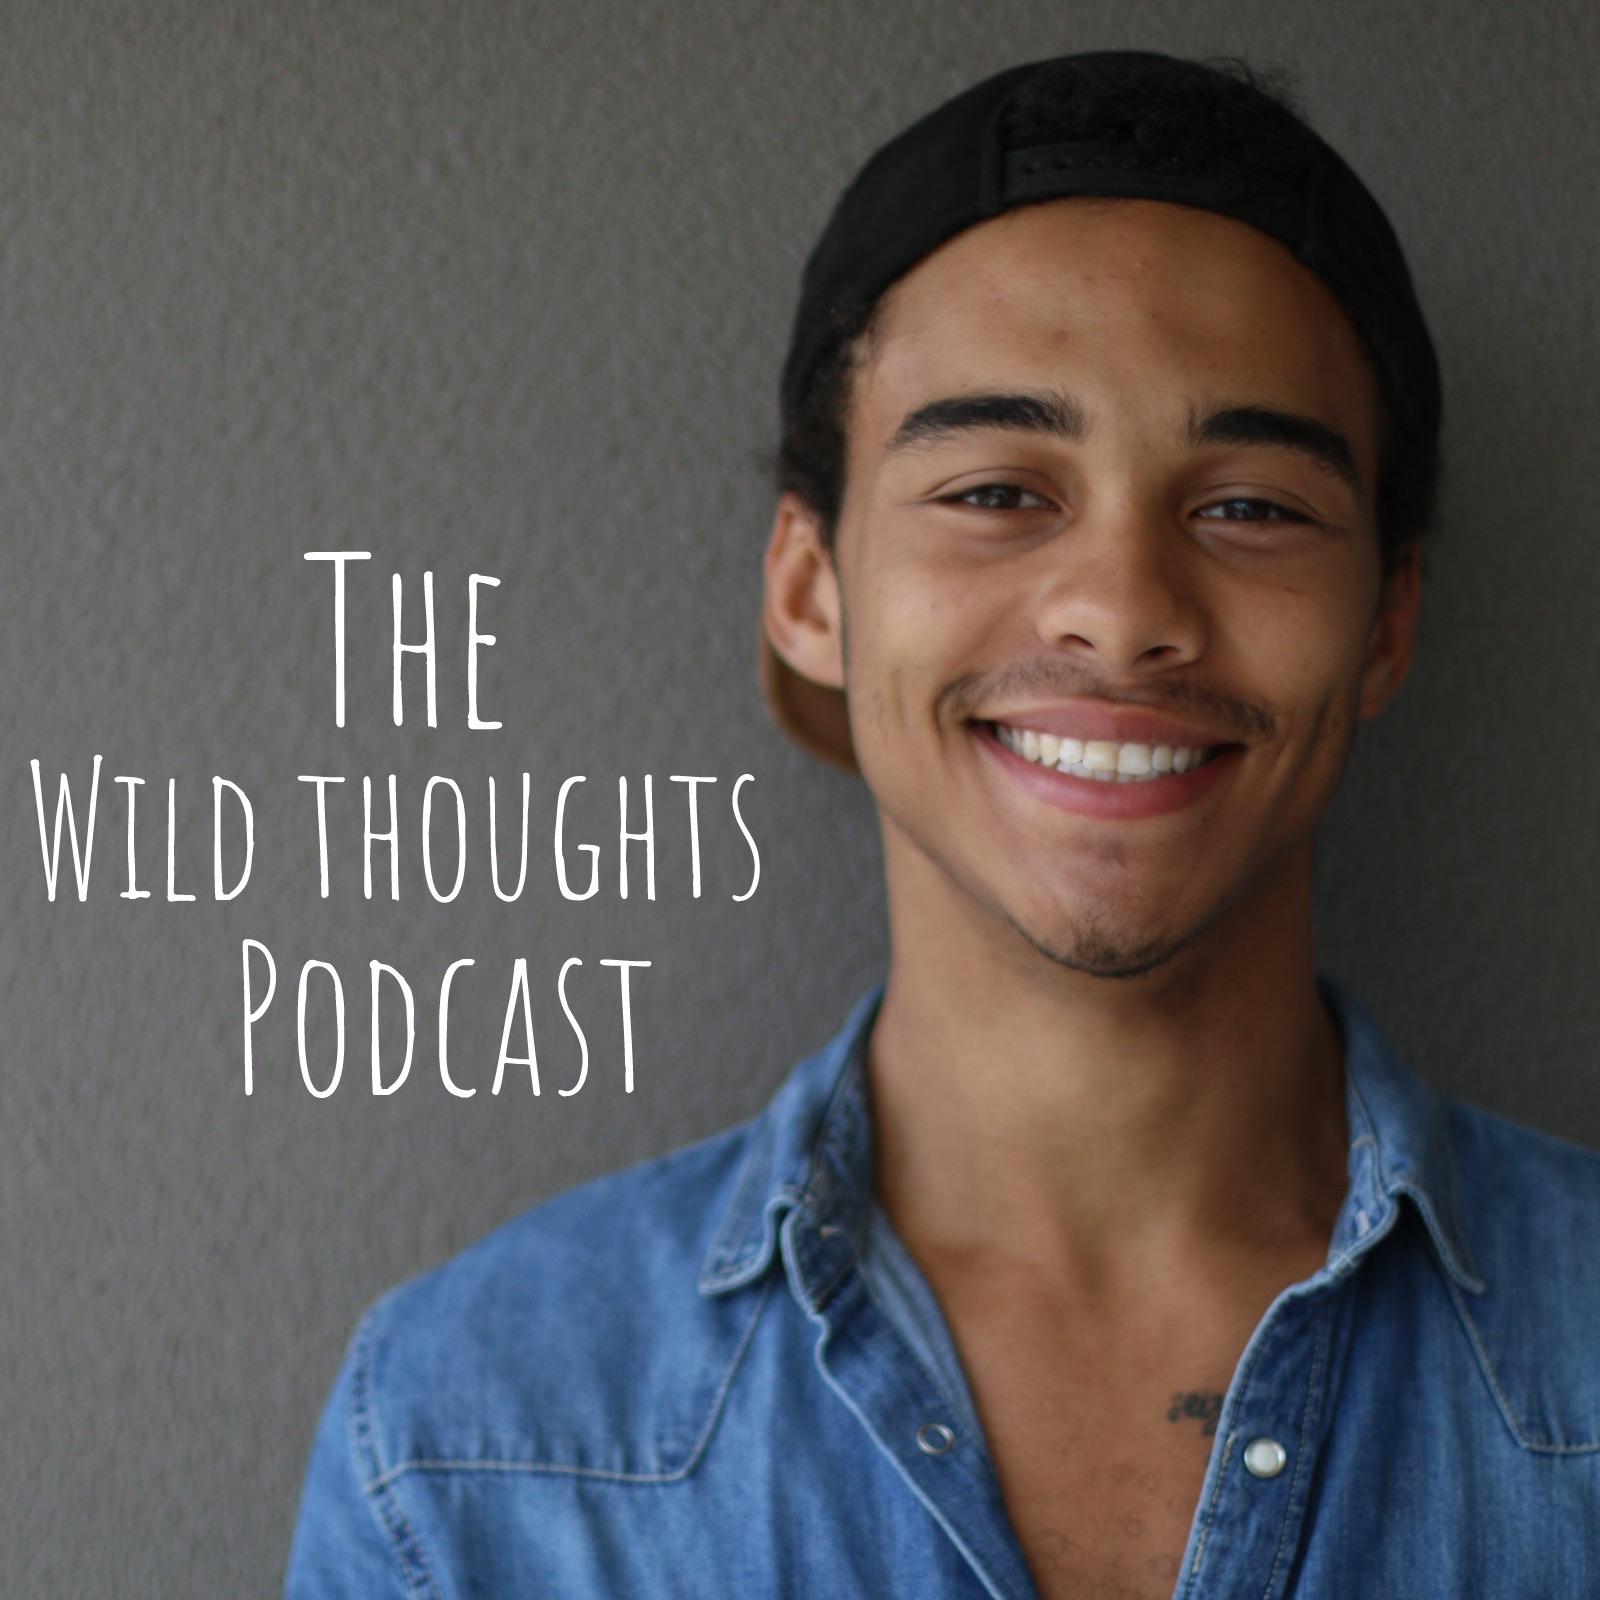 The Wild Thoughts Podcast